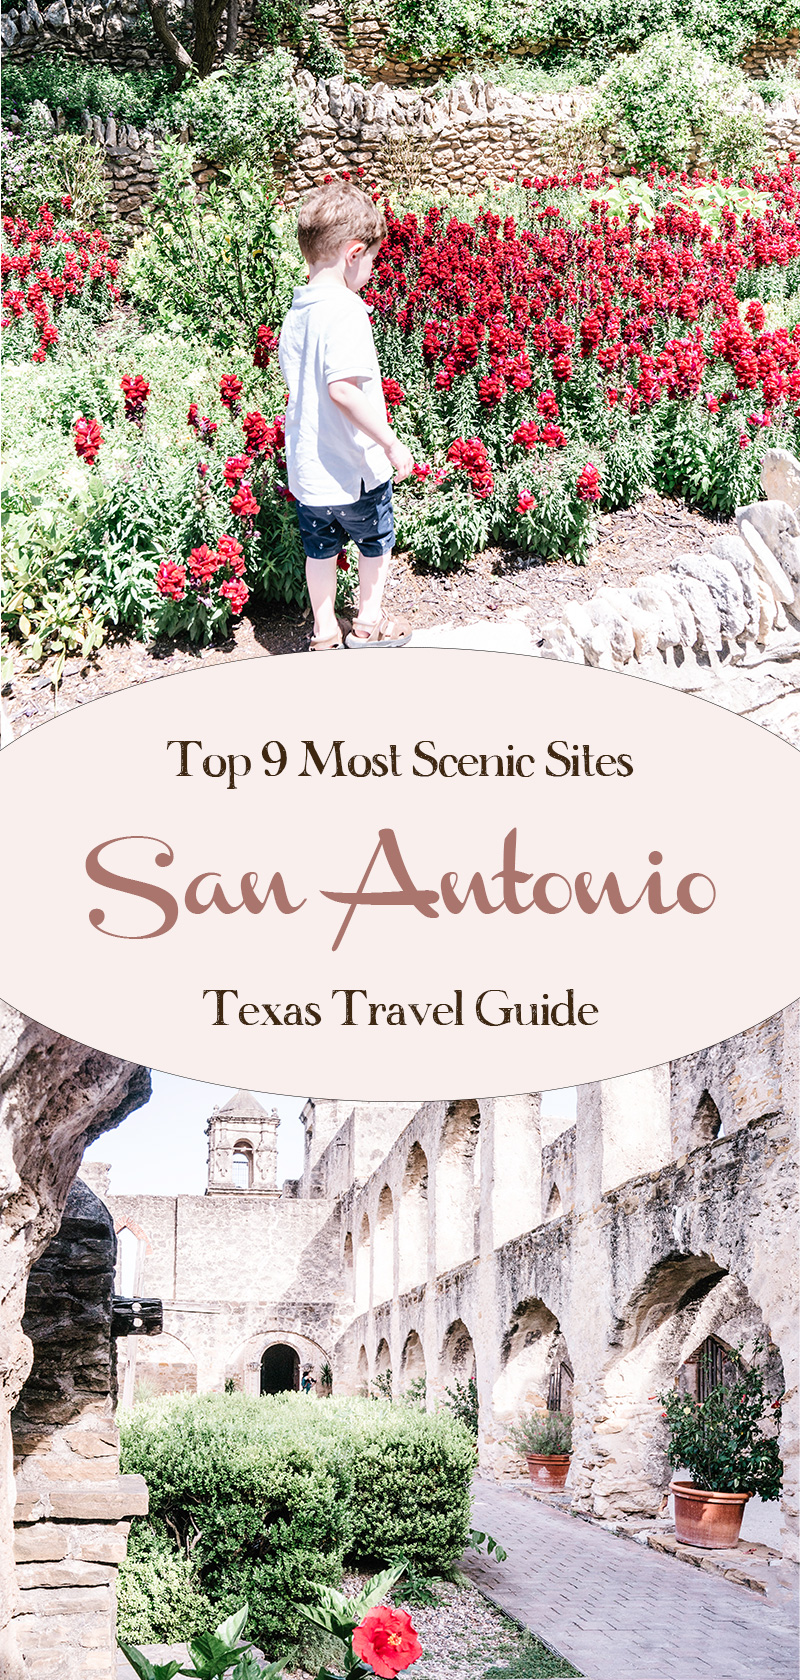 The-Top-9-Most-Scenic-and-Beautiful-Sites-You-Must-See-in-San-Antonio-Texas-Travel-Guide